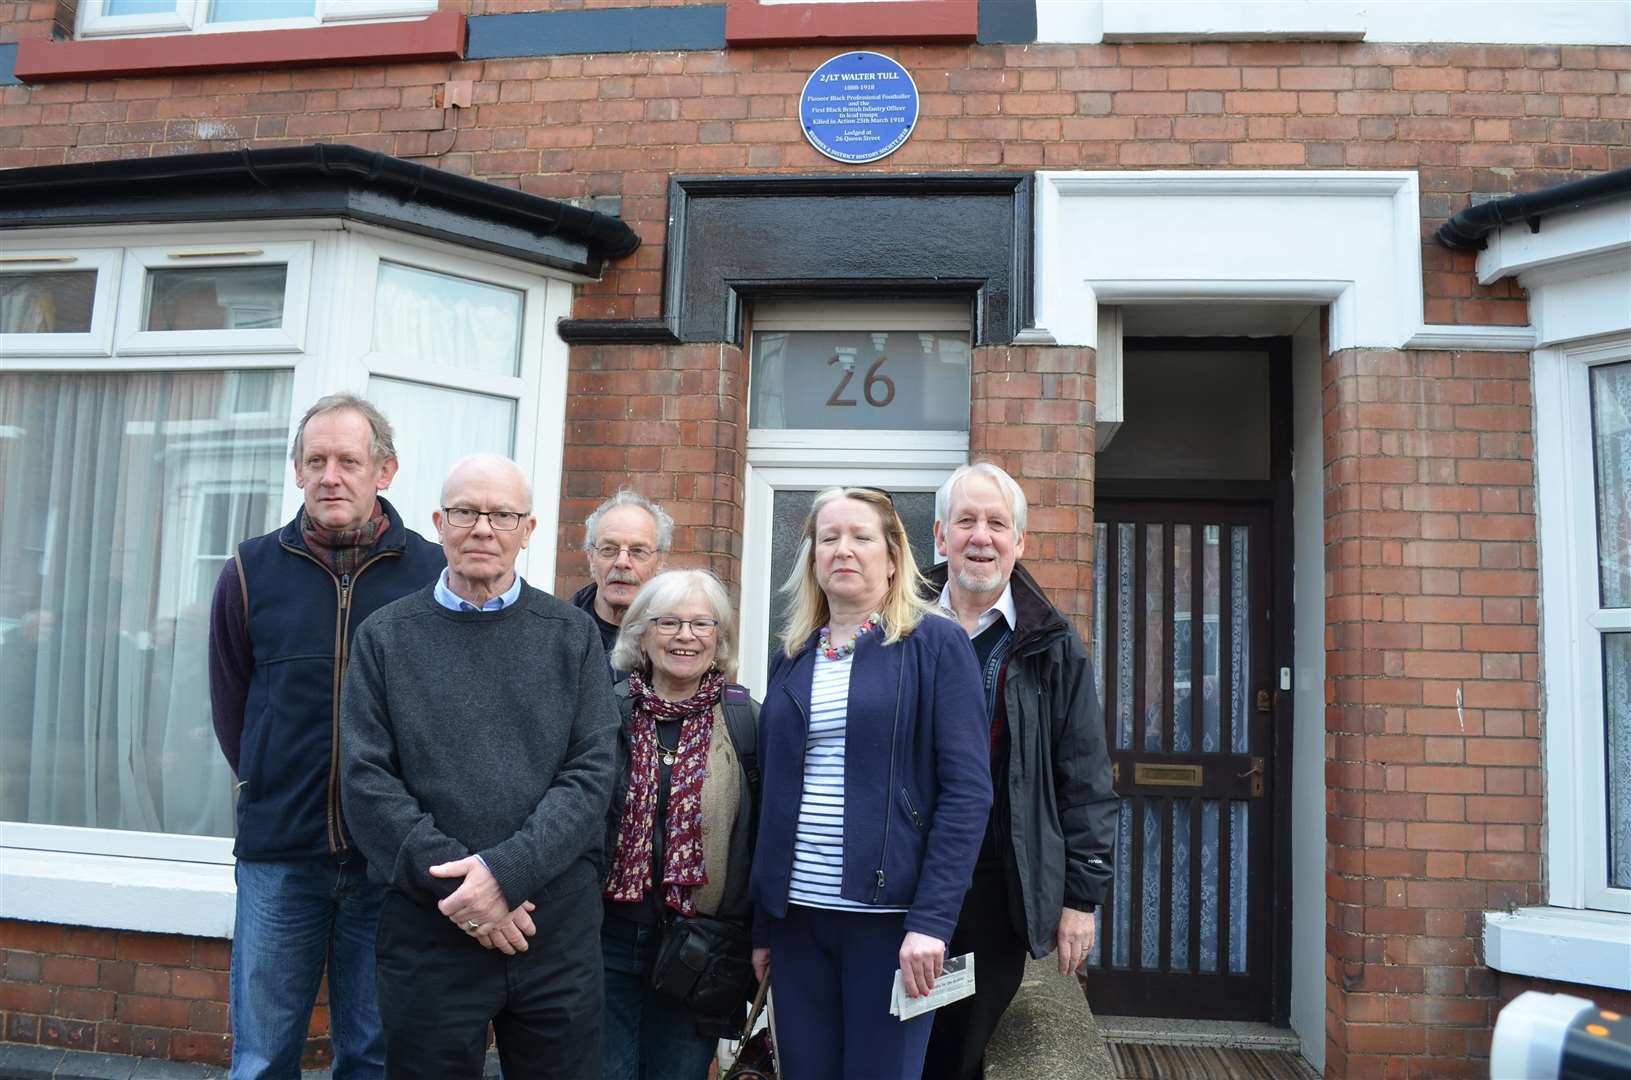 The unveiling of the plaque at Rushden, Northamptonshire. From Left Mark Bird, Ed Finlayson, Duncan Finlayson, Pat Justad, Elizabeth Coombe and Graham Tutthill. Picture courtesy of Graham Tutthill. (1422380)